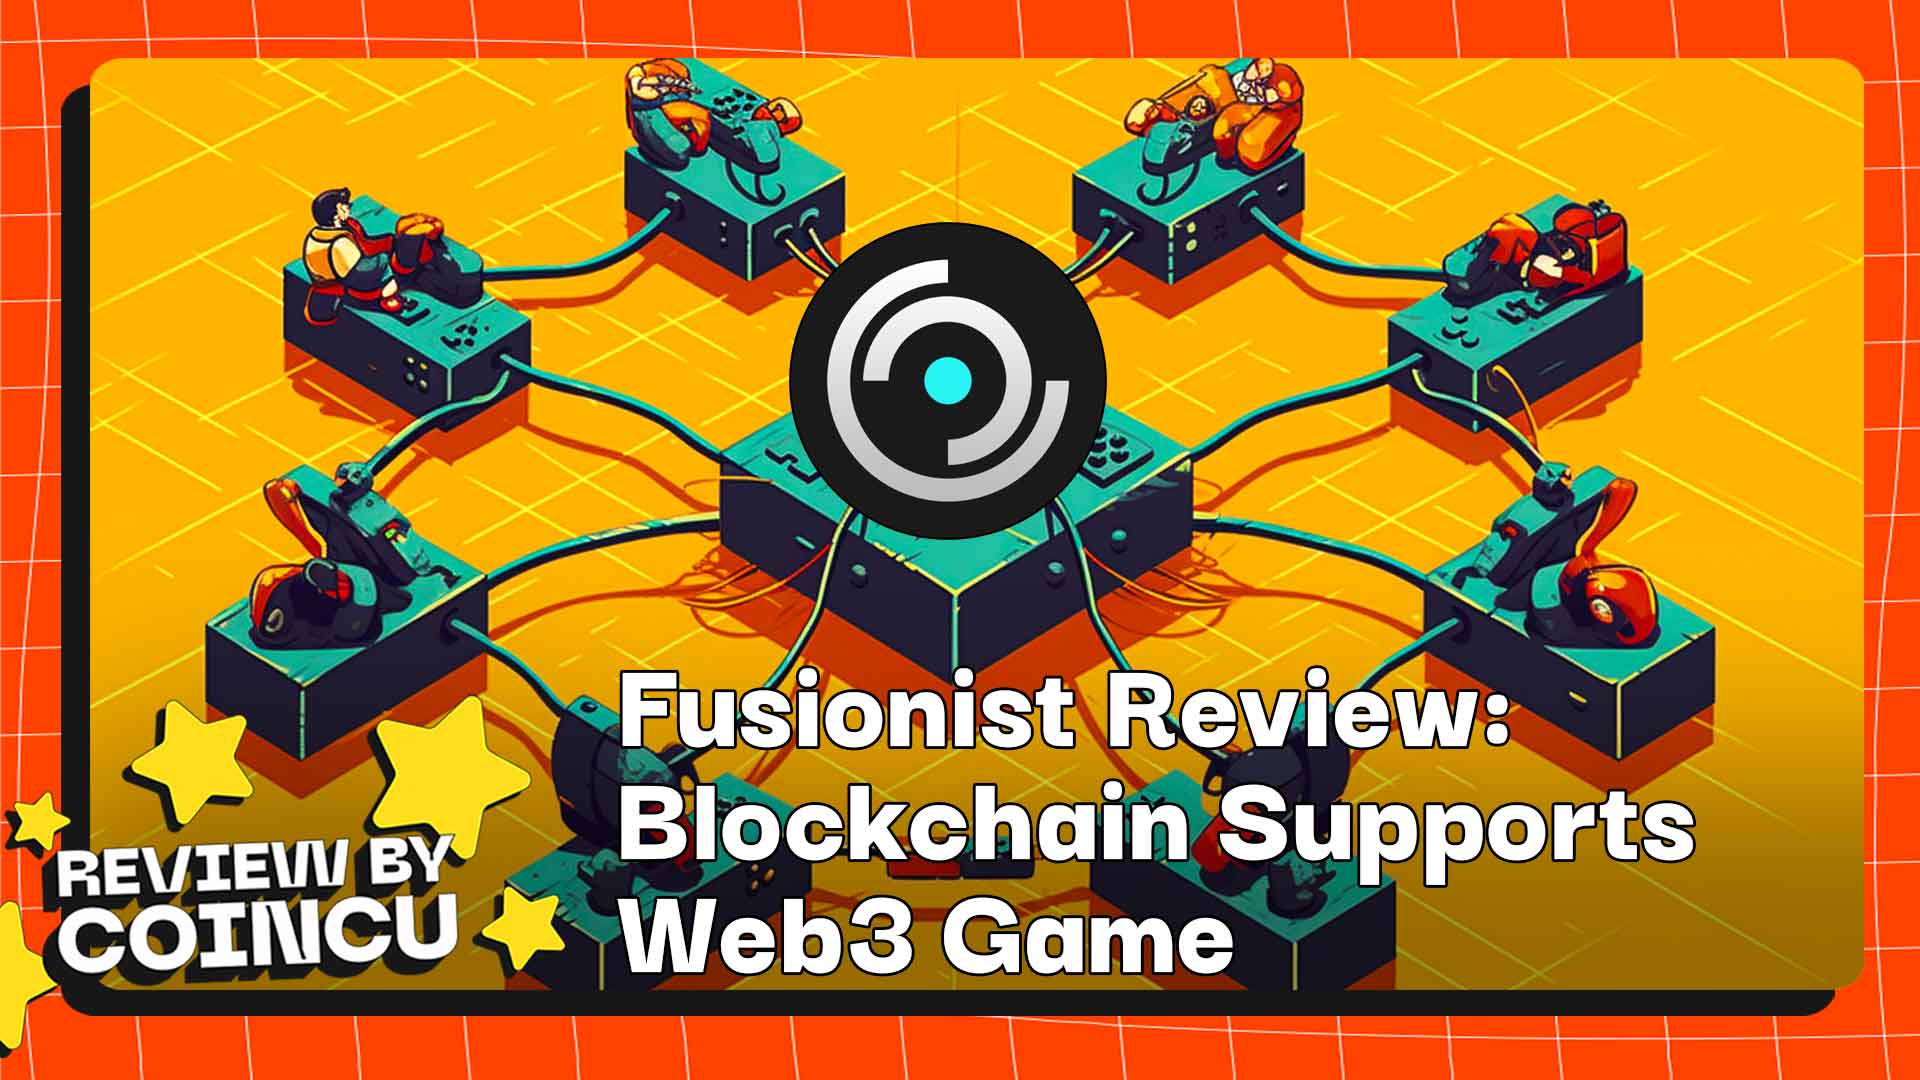 Fusionist Review: Blockchain Supports Web3 Game